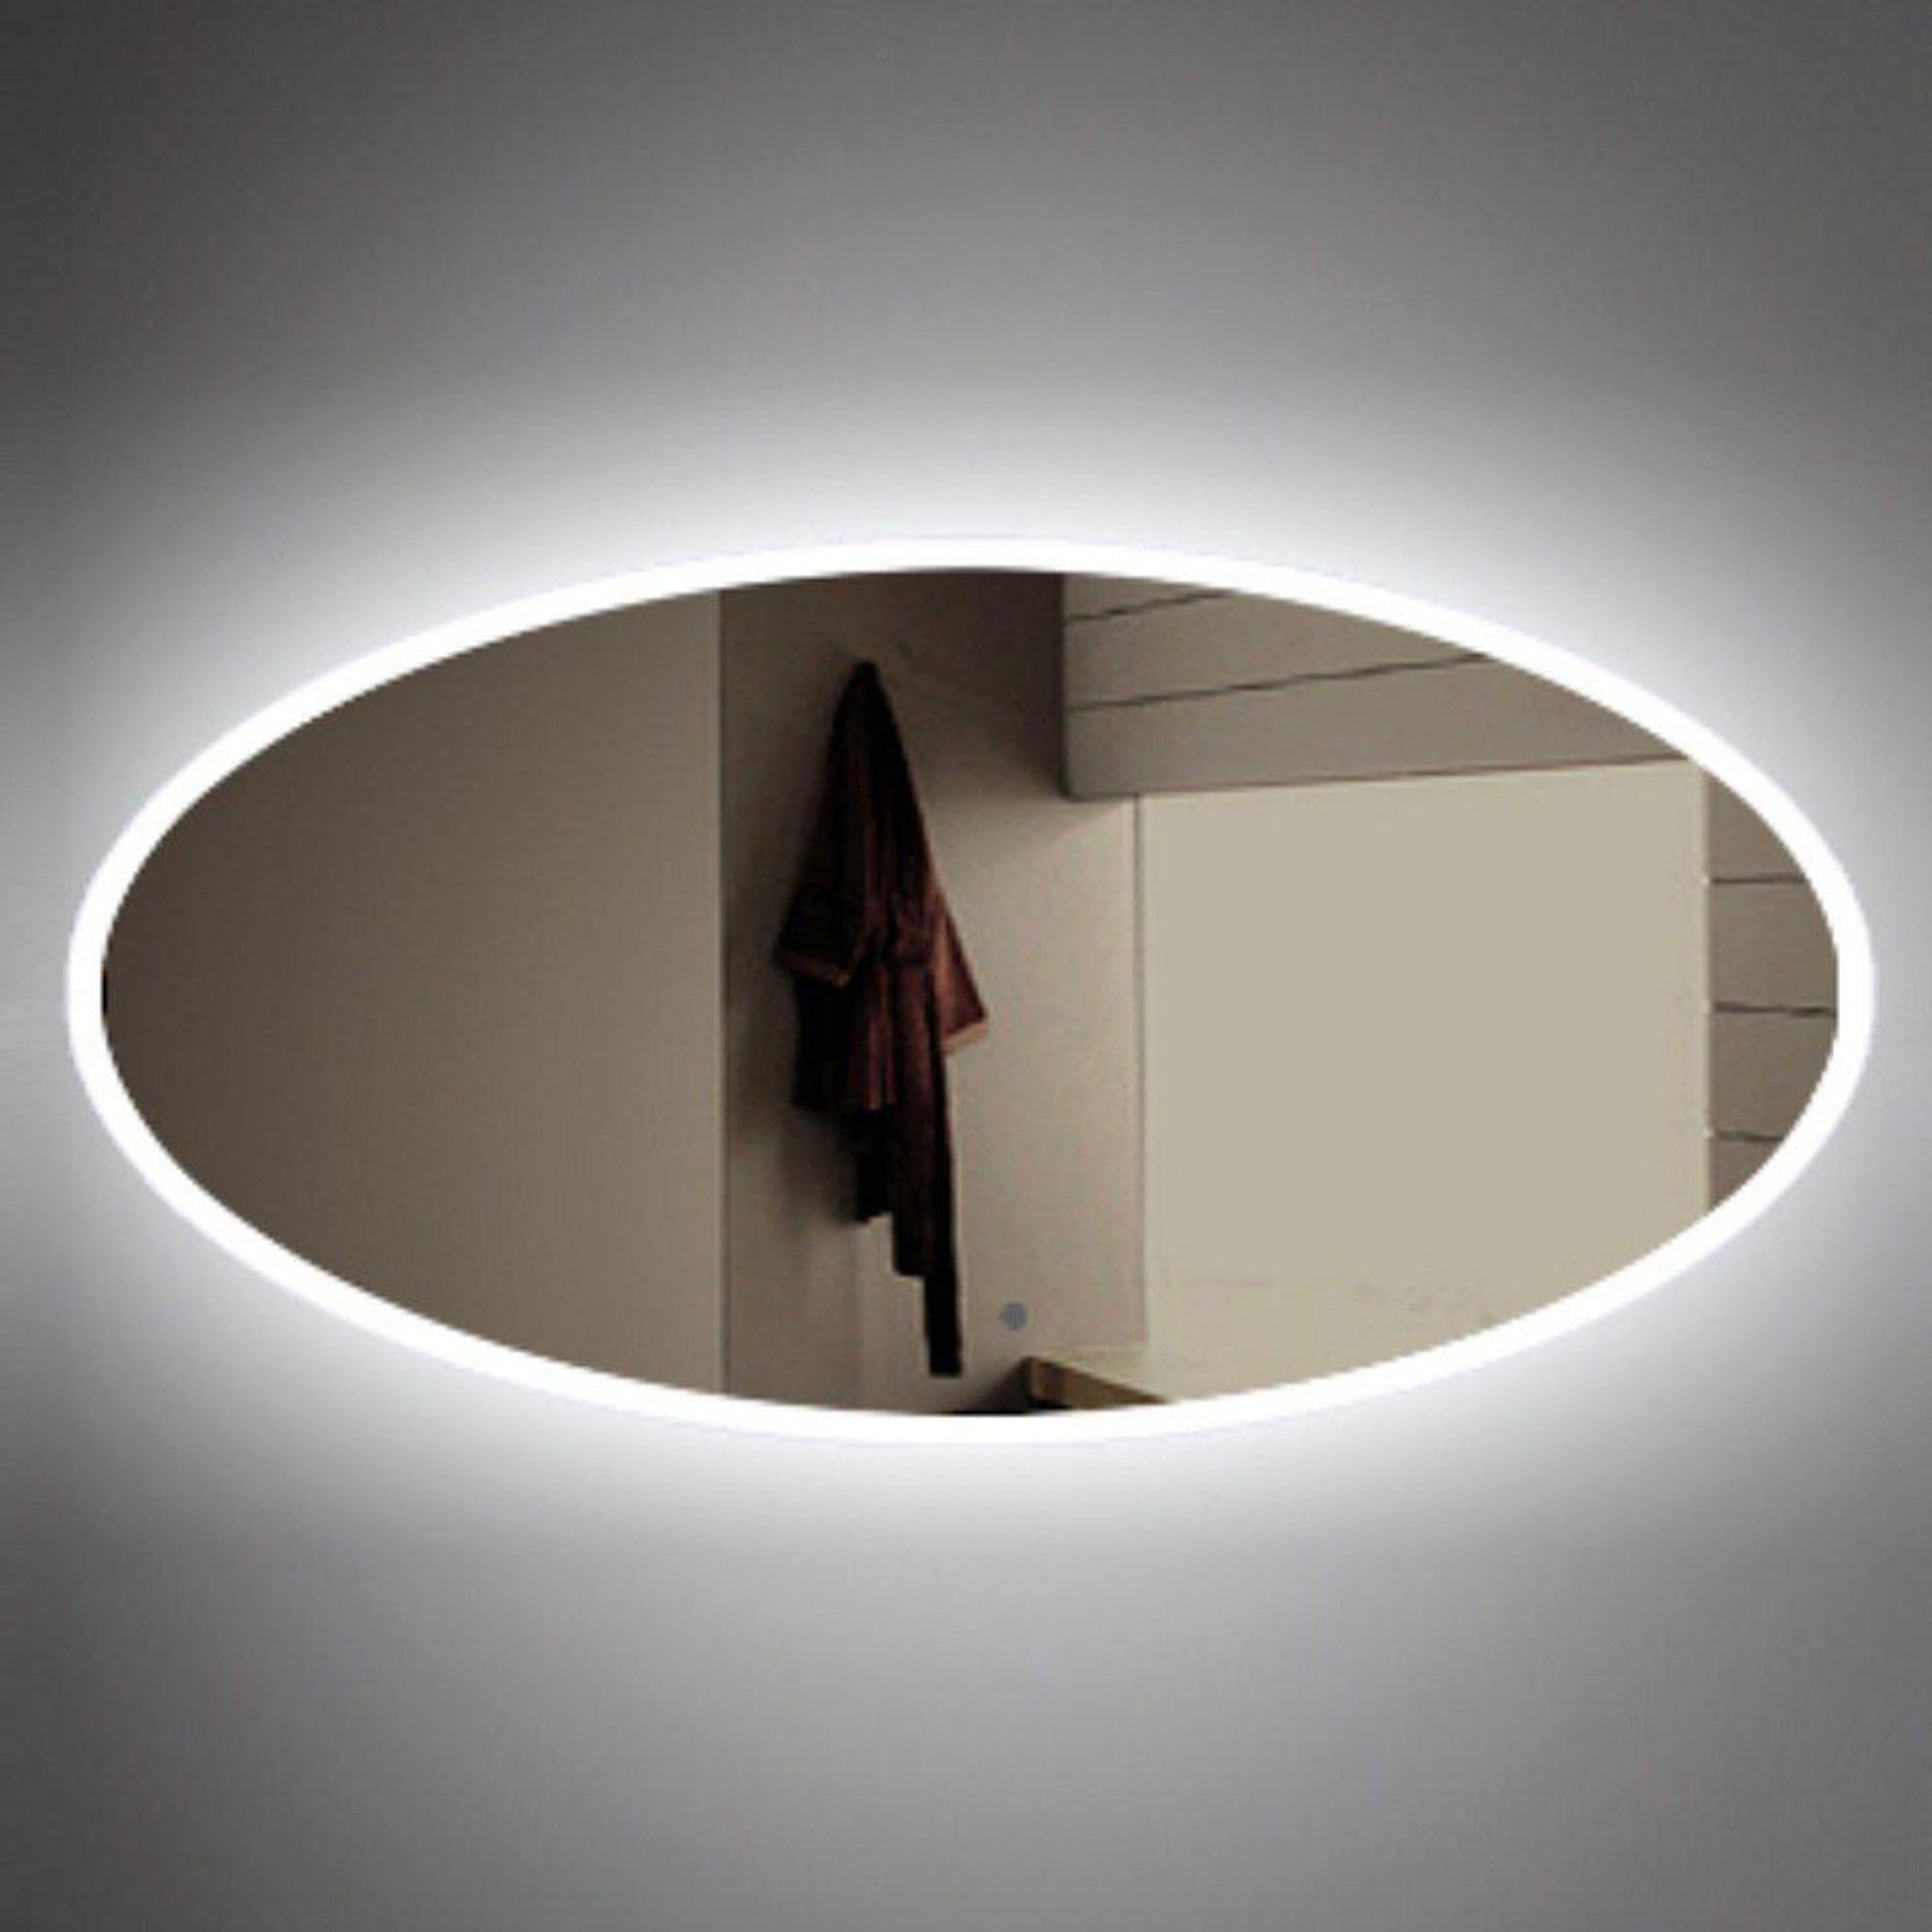 Lighted Impressions Cosmos 48" x 24" Oval Frameless Wall-Mounted LED Mirror With IR Sensor